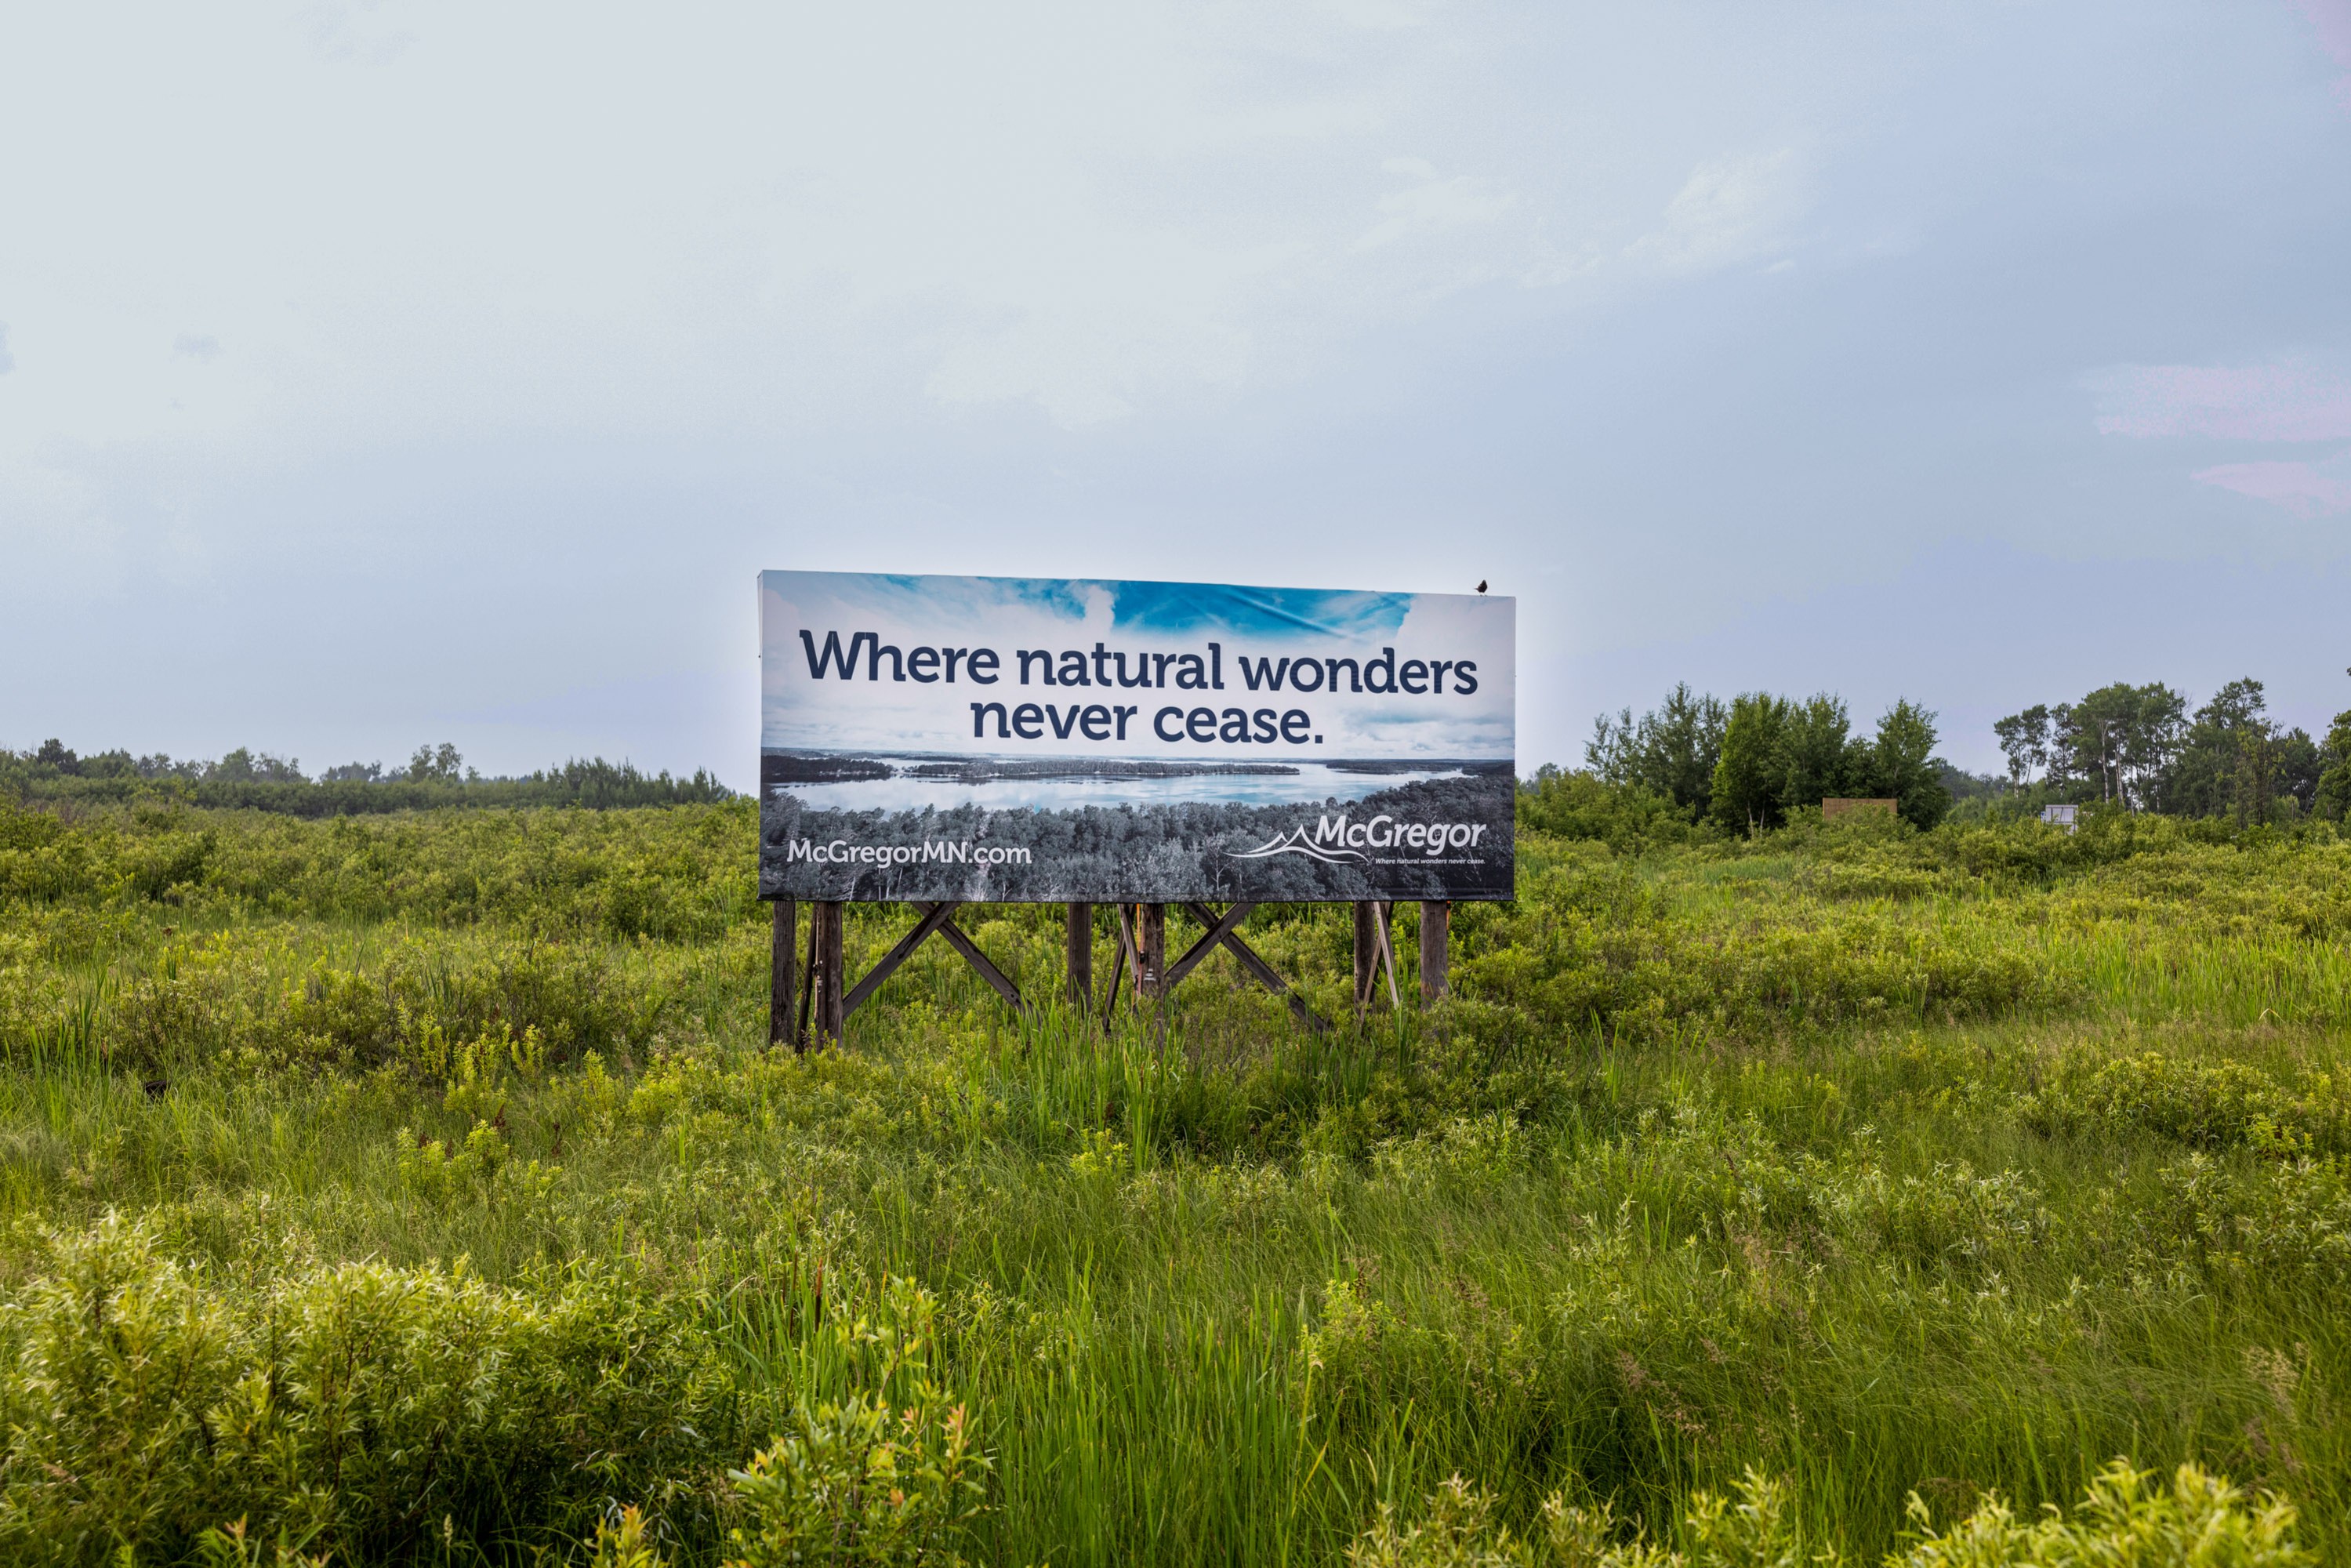 A billboard in a grassy field that reads, "Where natural wonders never cease. McGregor MN"